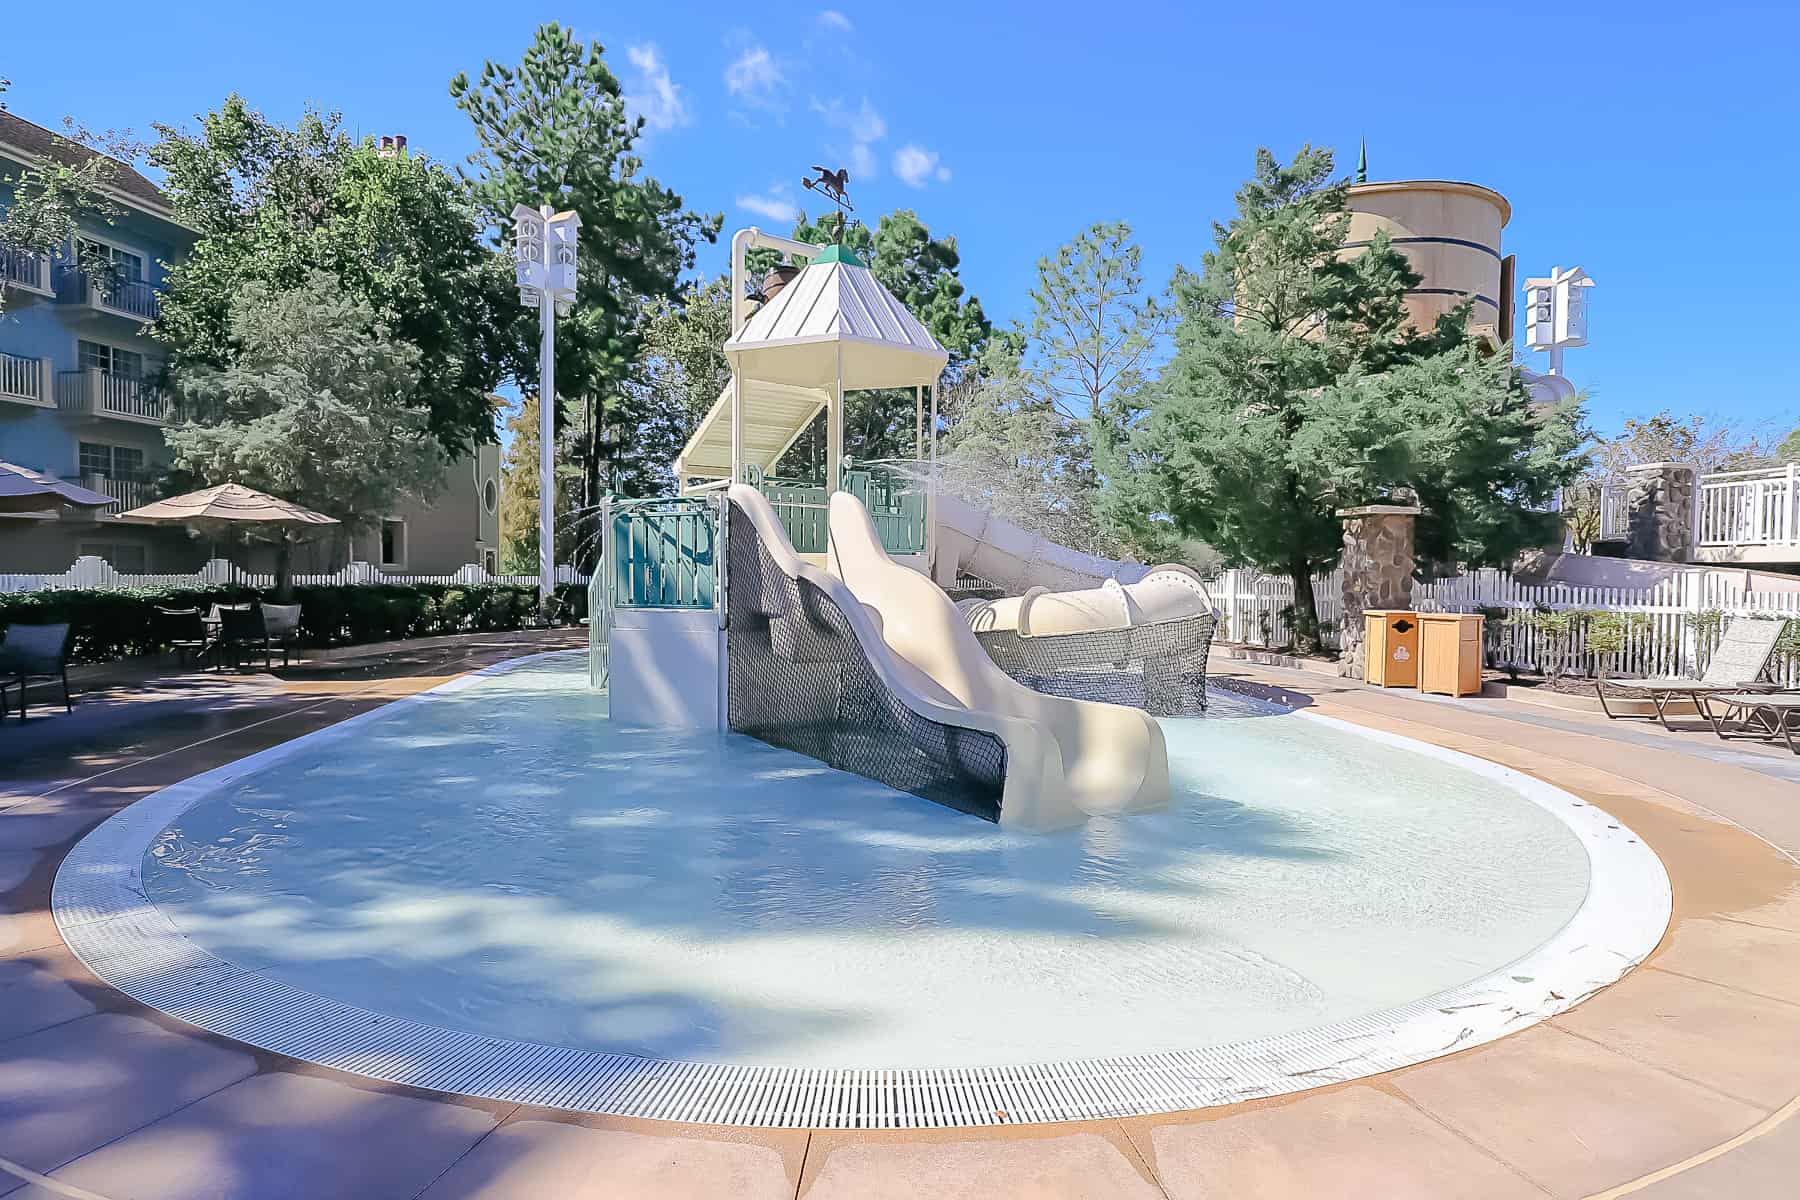 aquatic play area with slides for smaller children at Saratoga Springs 